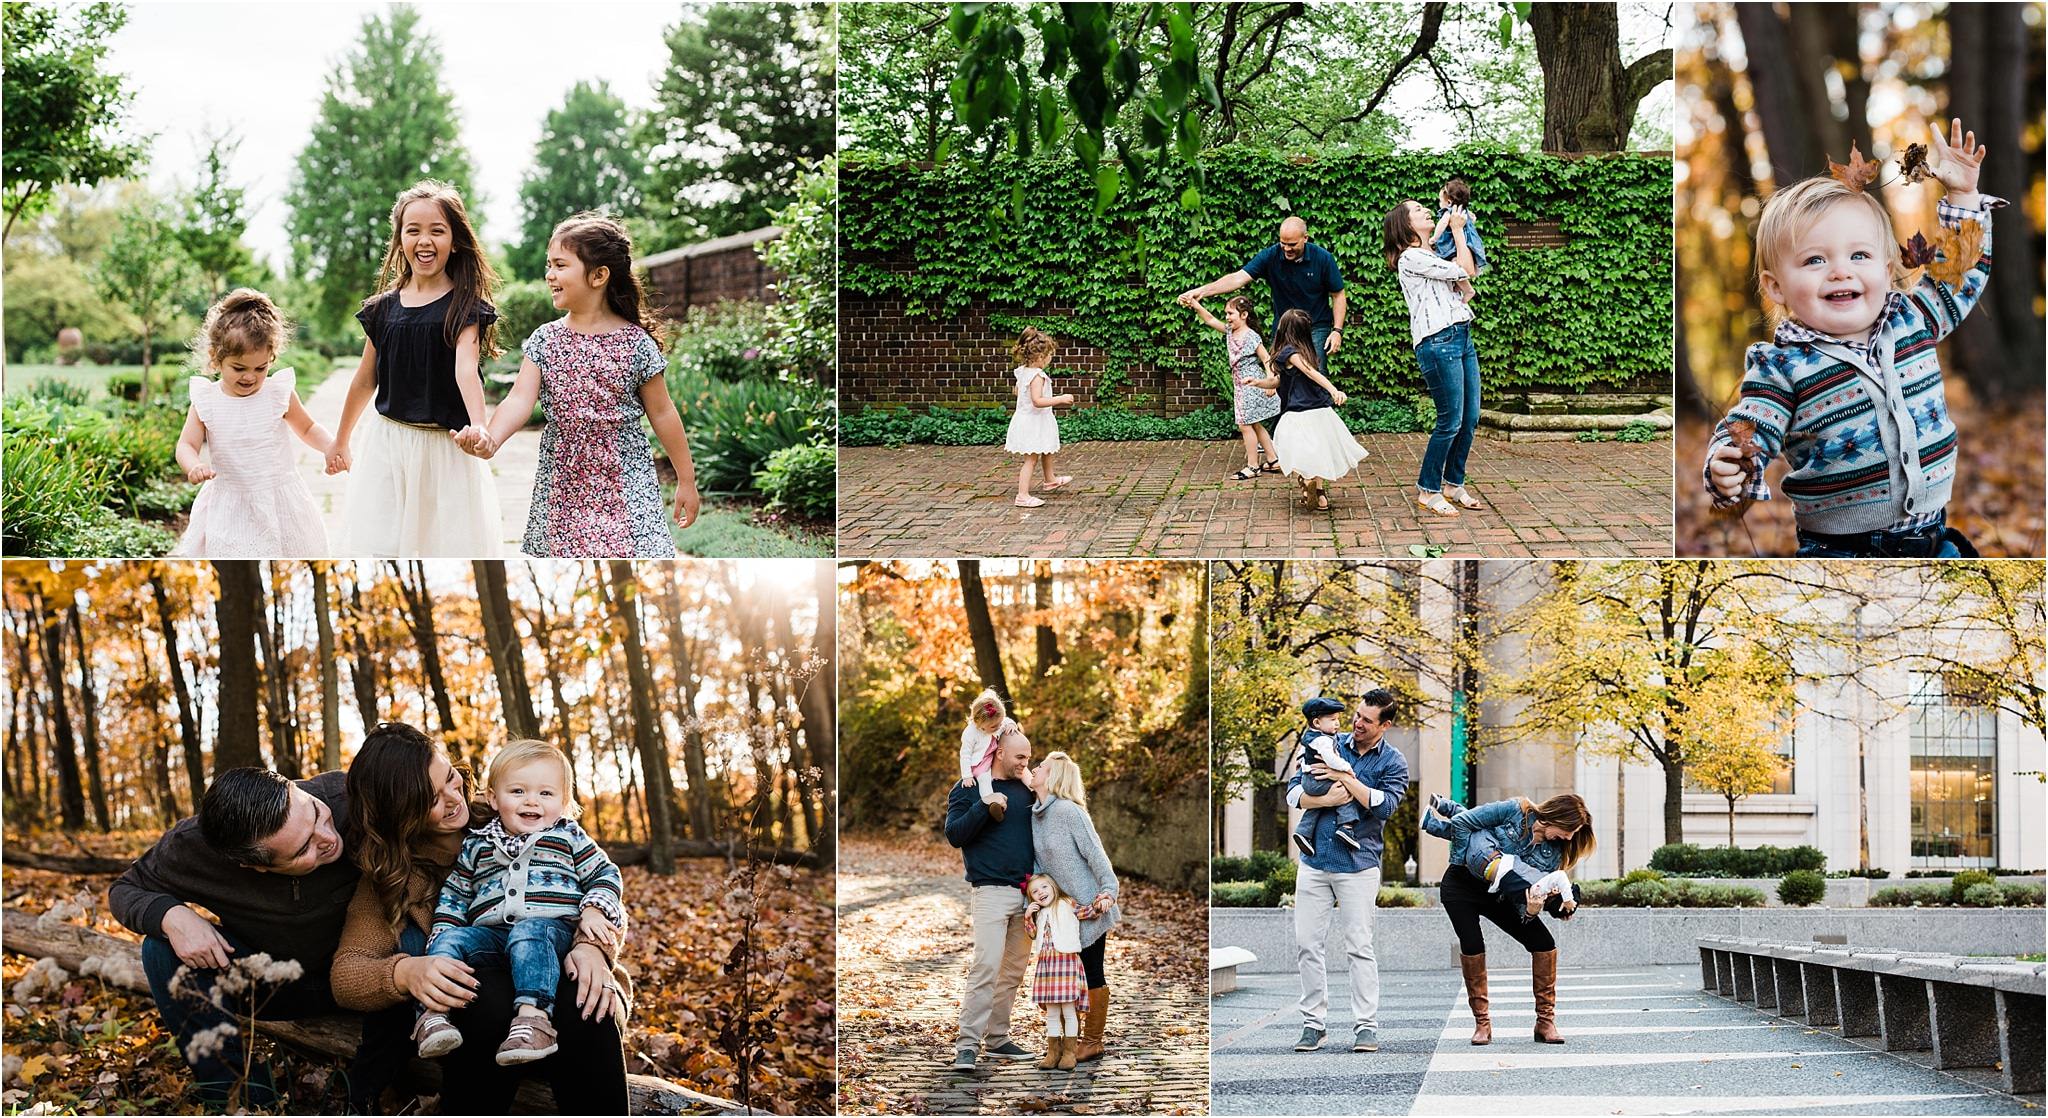 Outdoor Family Photos In Pittsburgh, PA